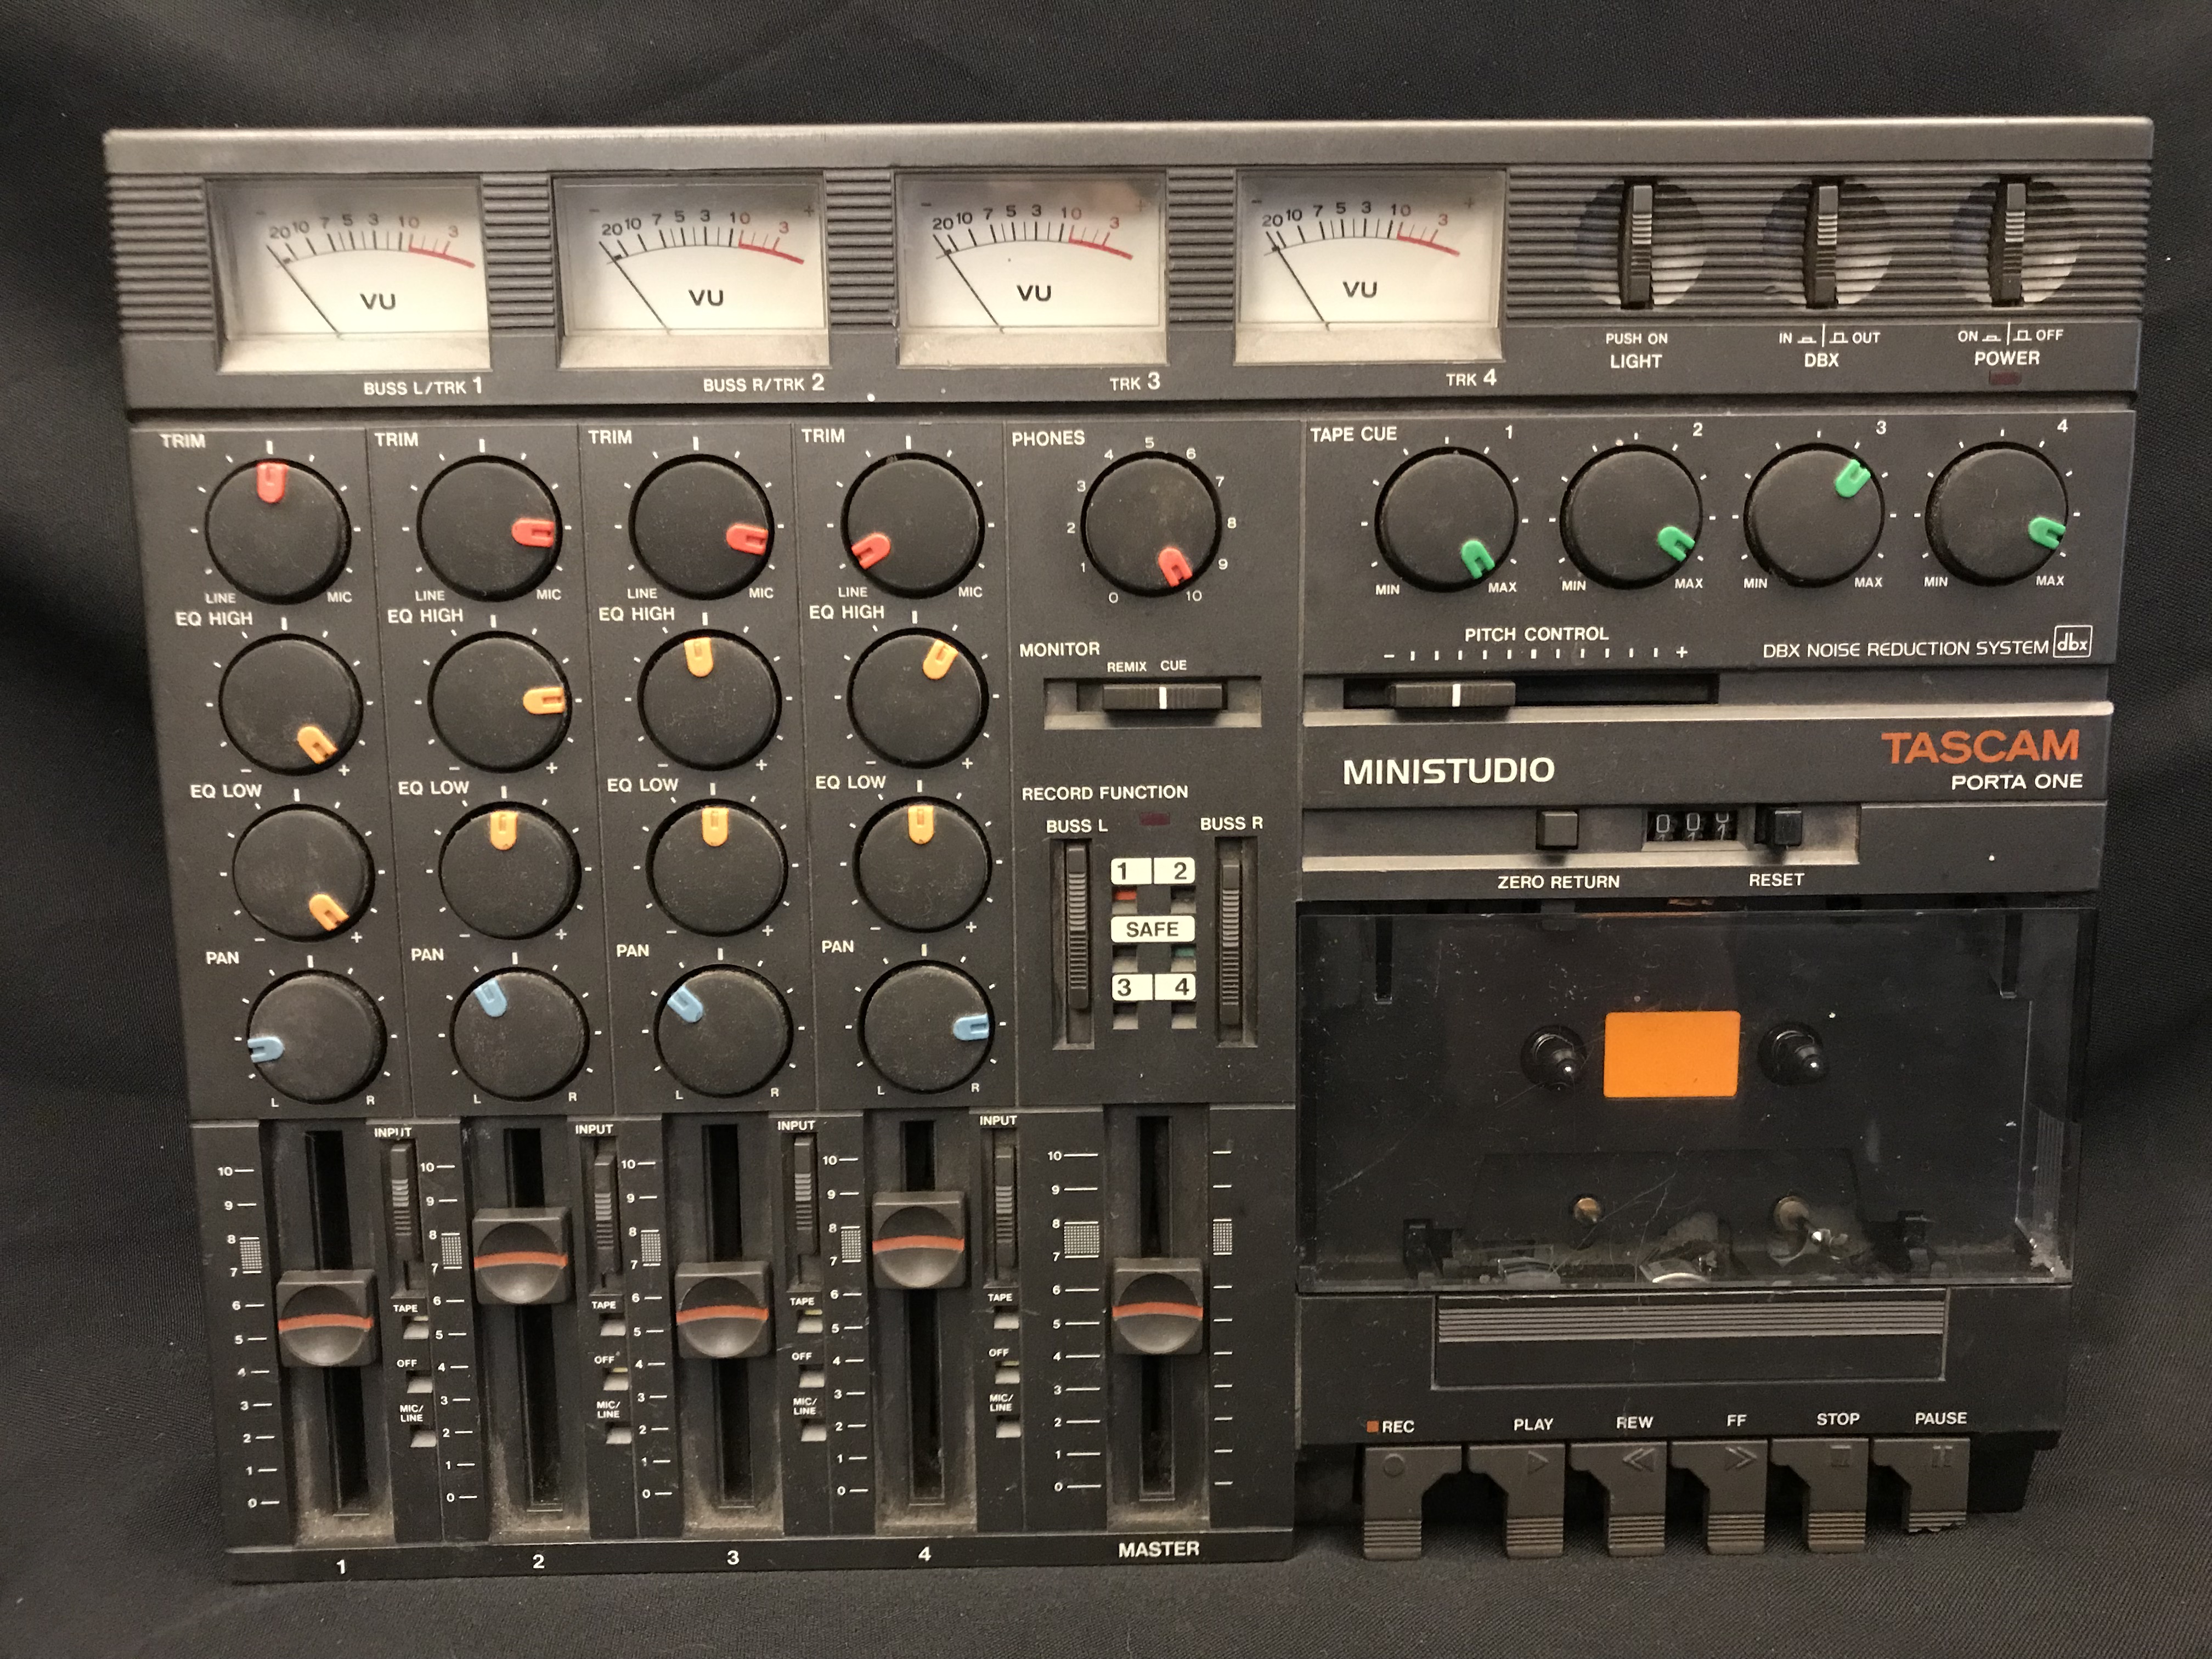 Tascam Porta One Ministudio AS-IS 4-track Tape Recorder Mixer - Eclectic  Sounds